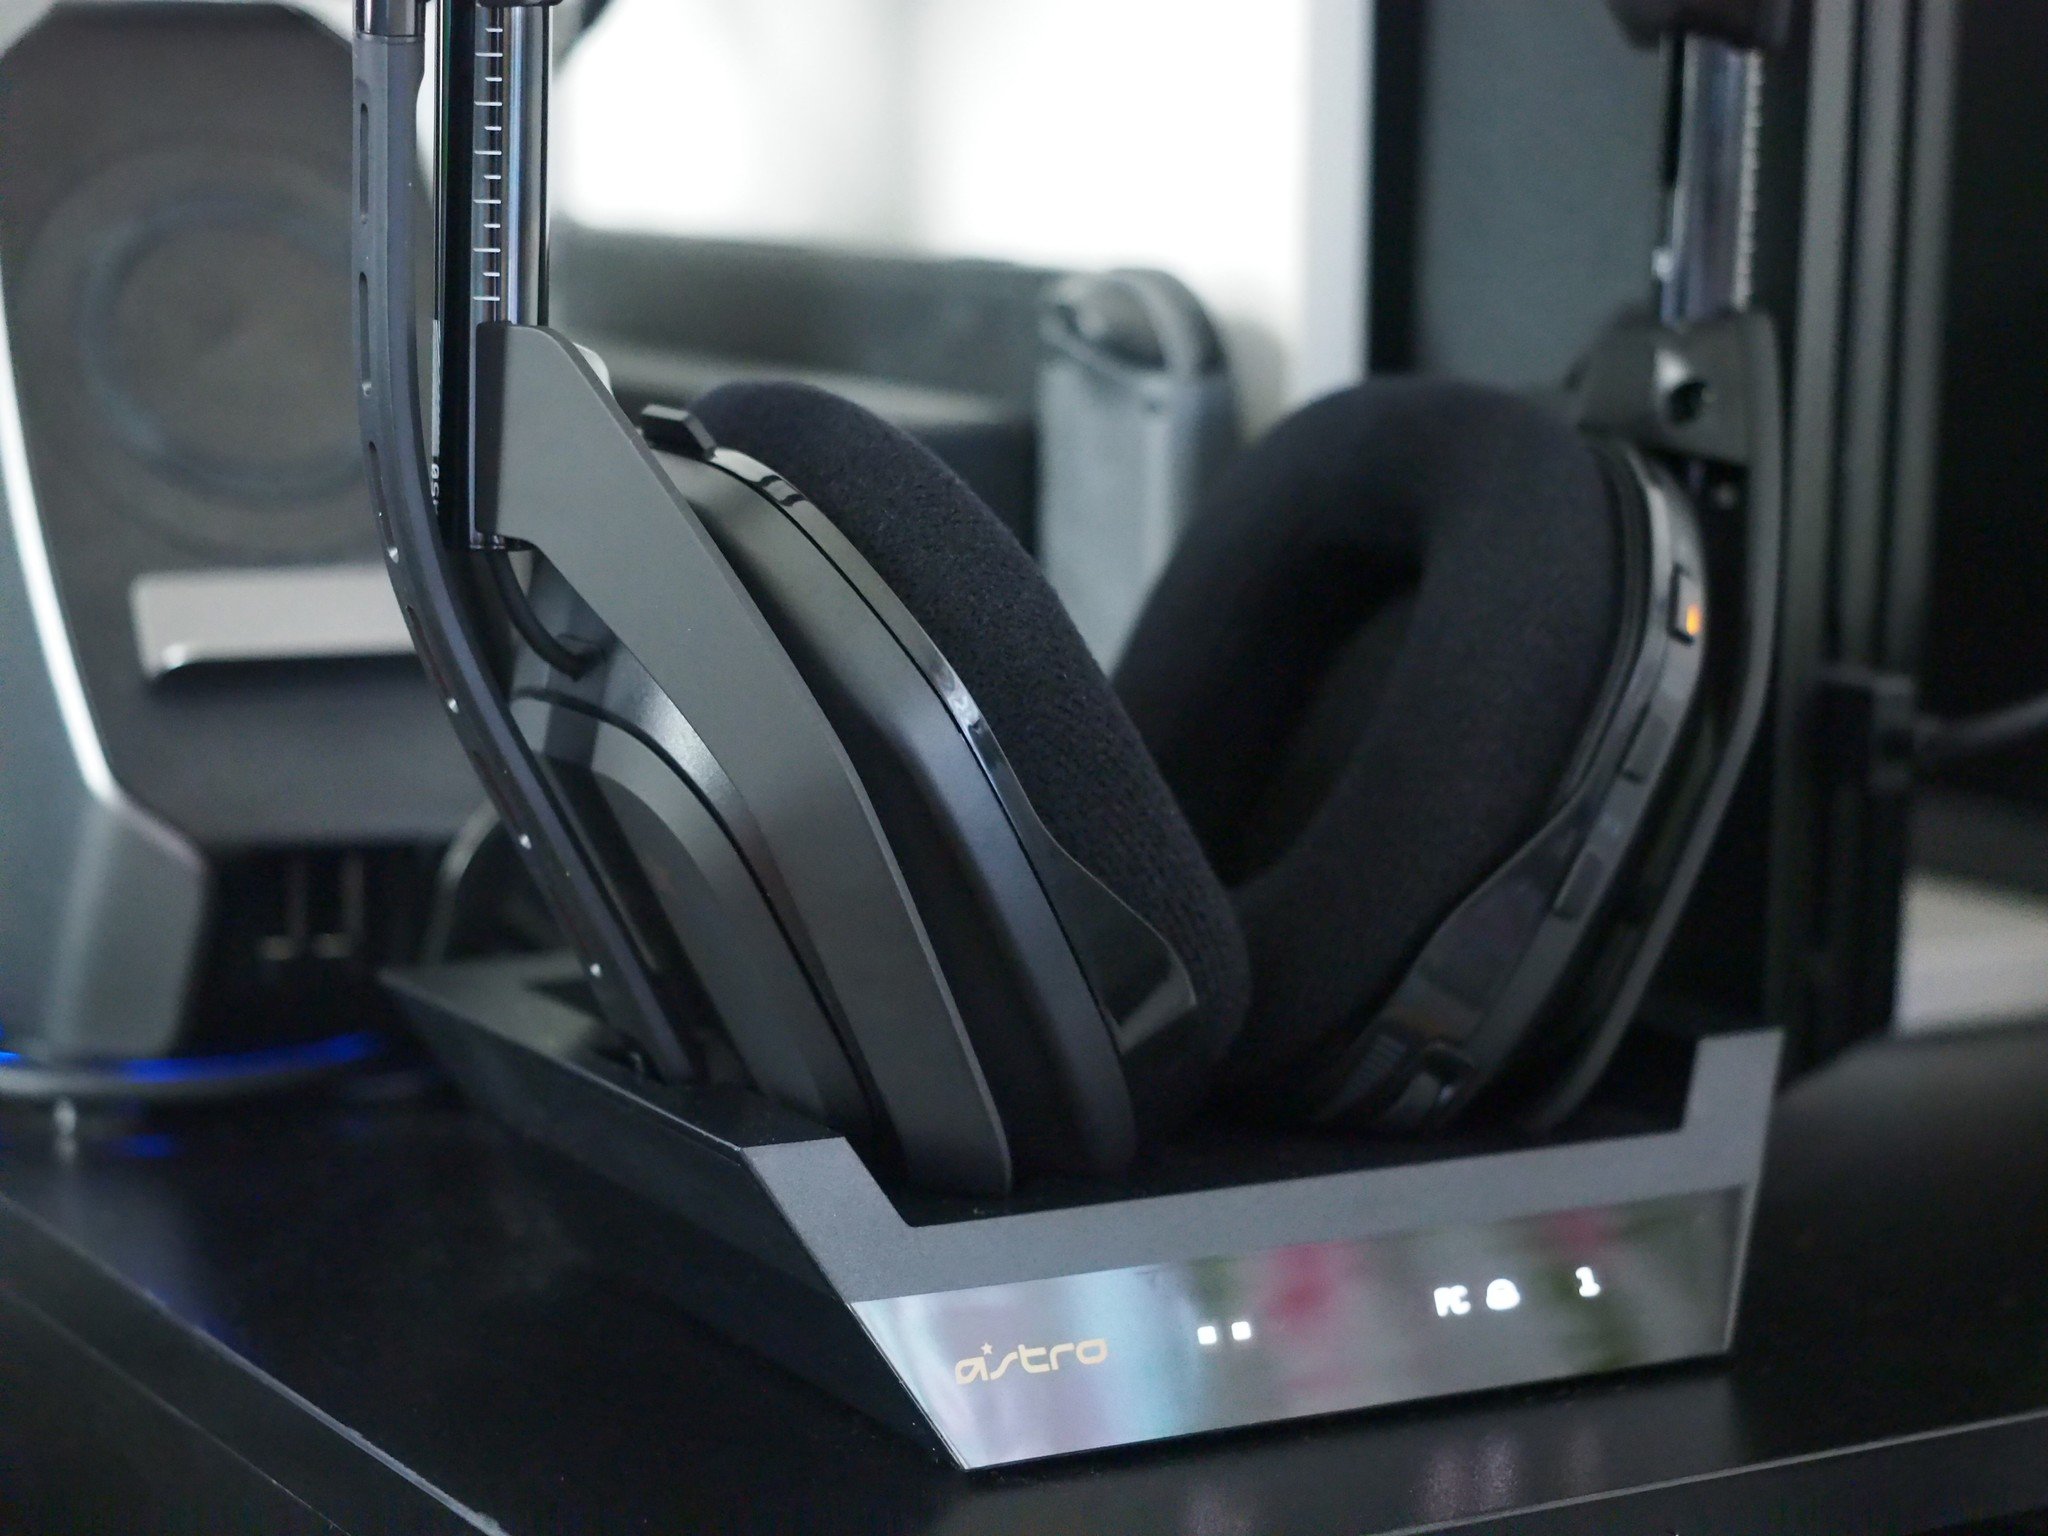 Astro A50 headsest